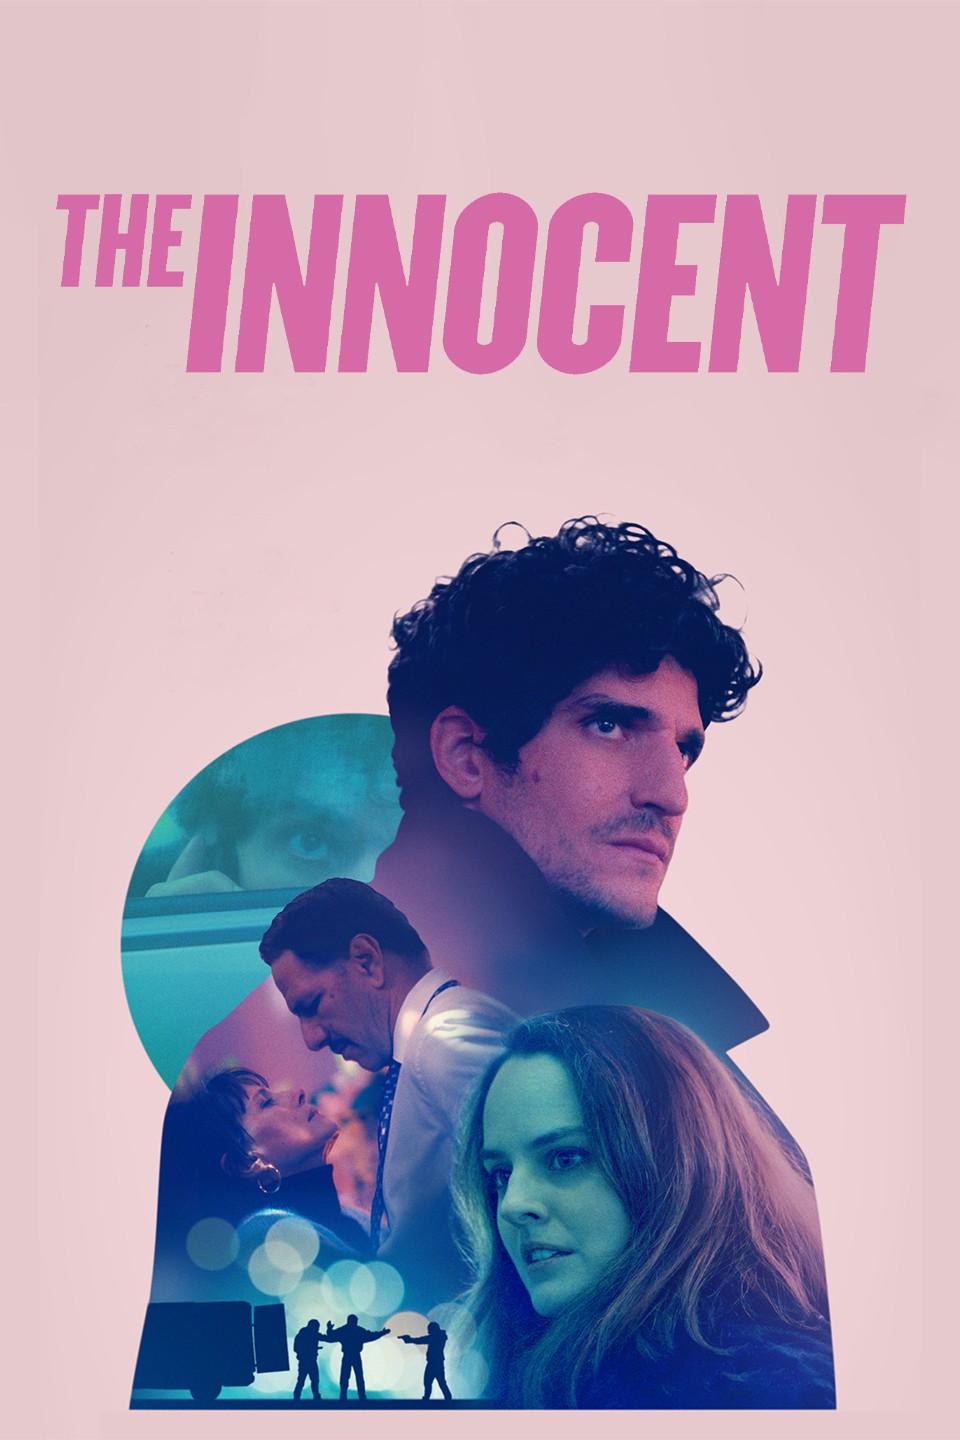 Louis Garrel on His New Film The Innocent and Being a Sex Symbol